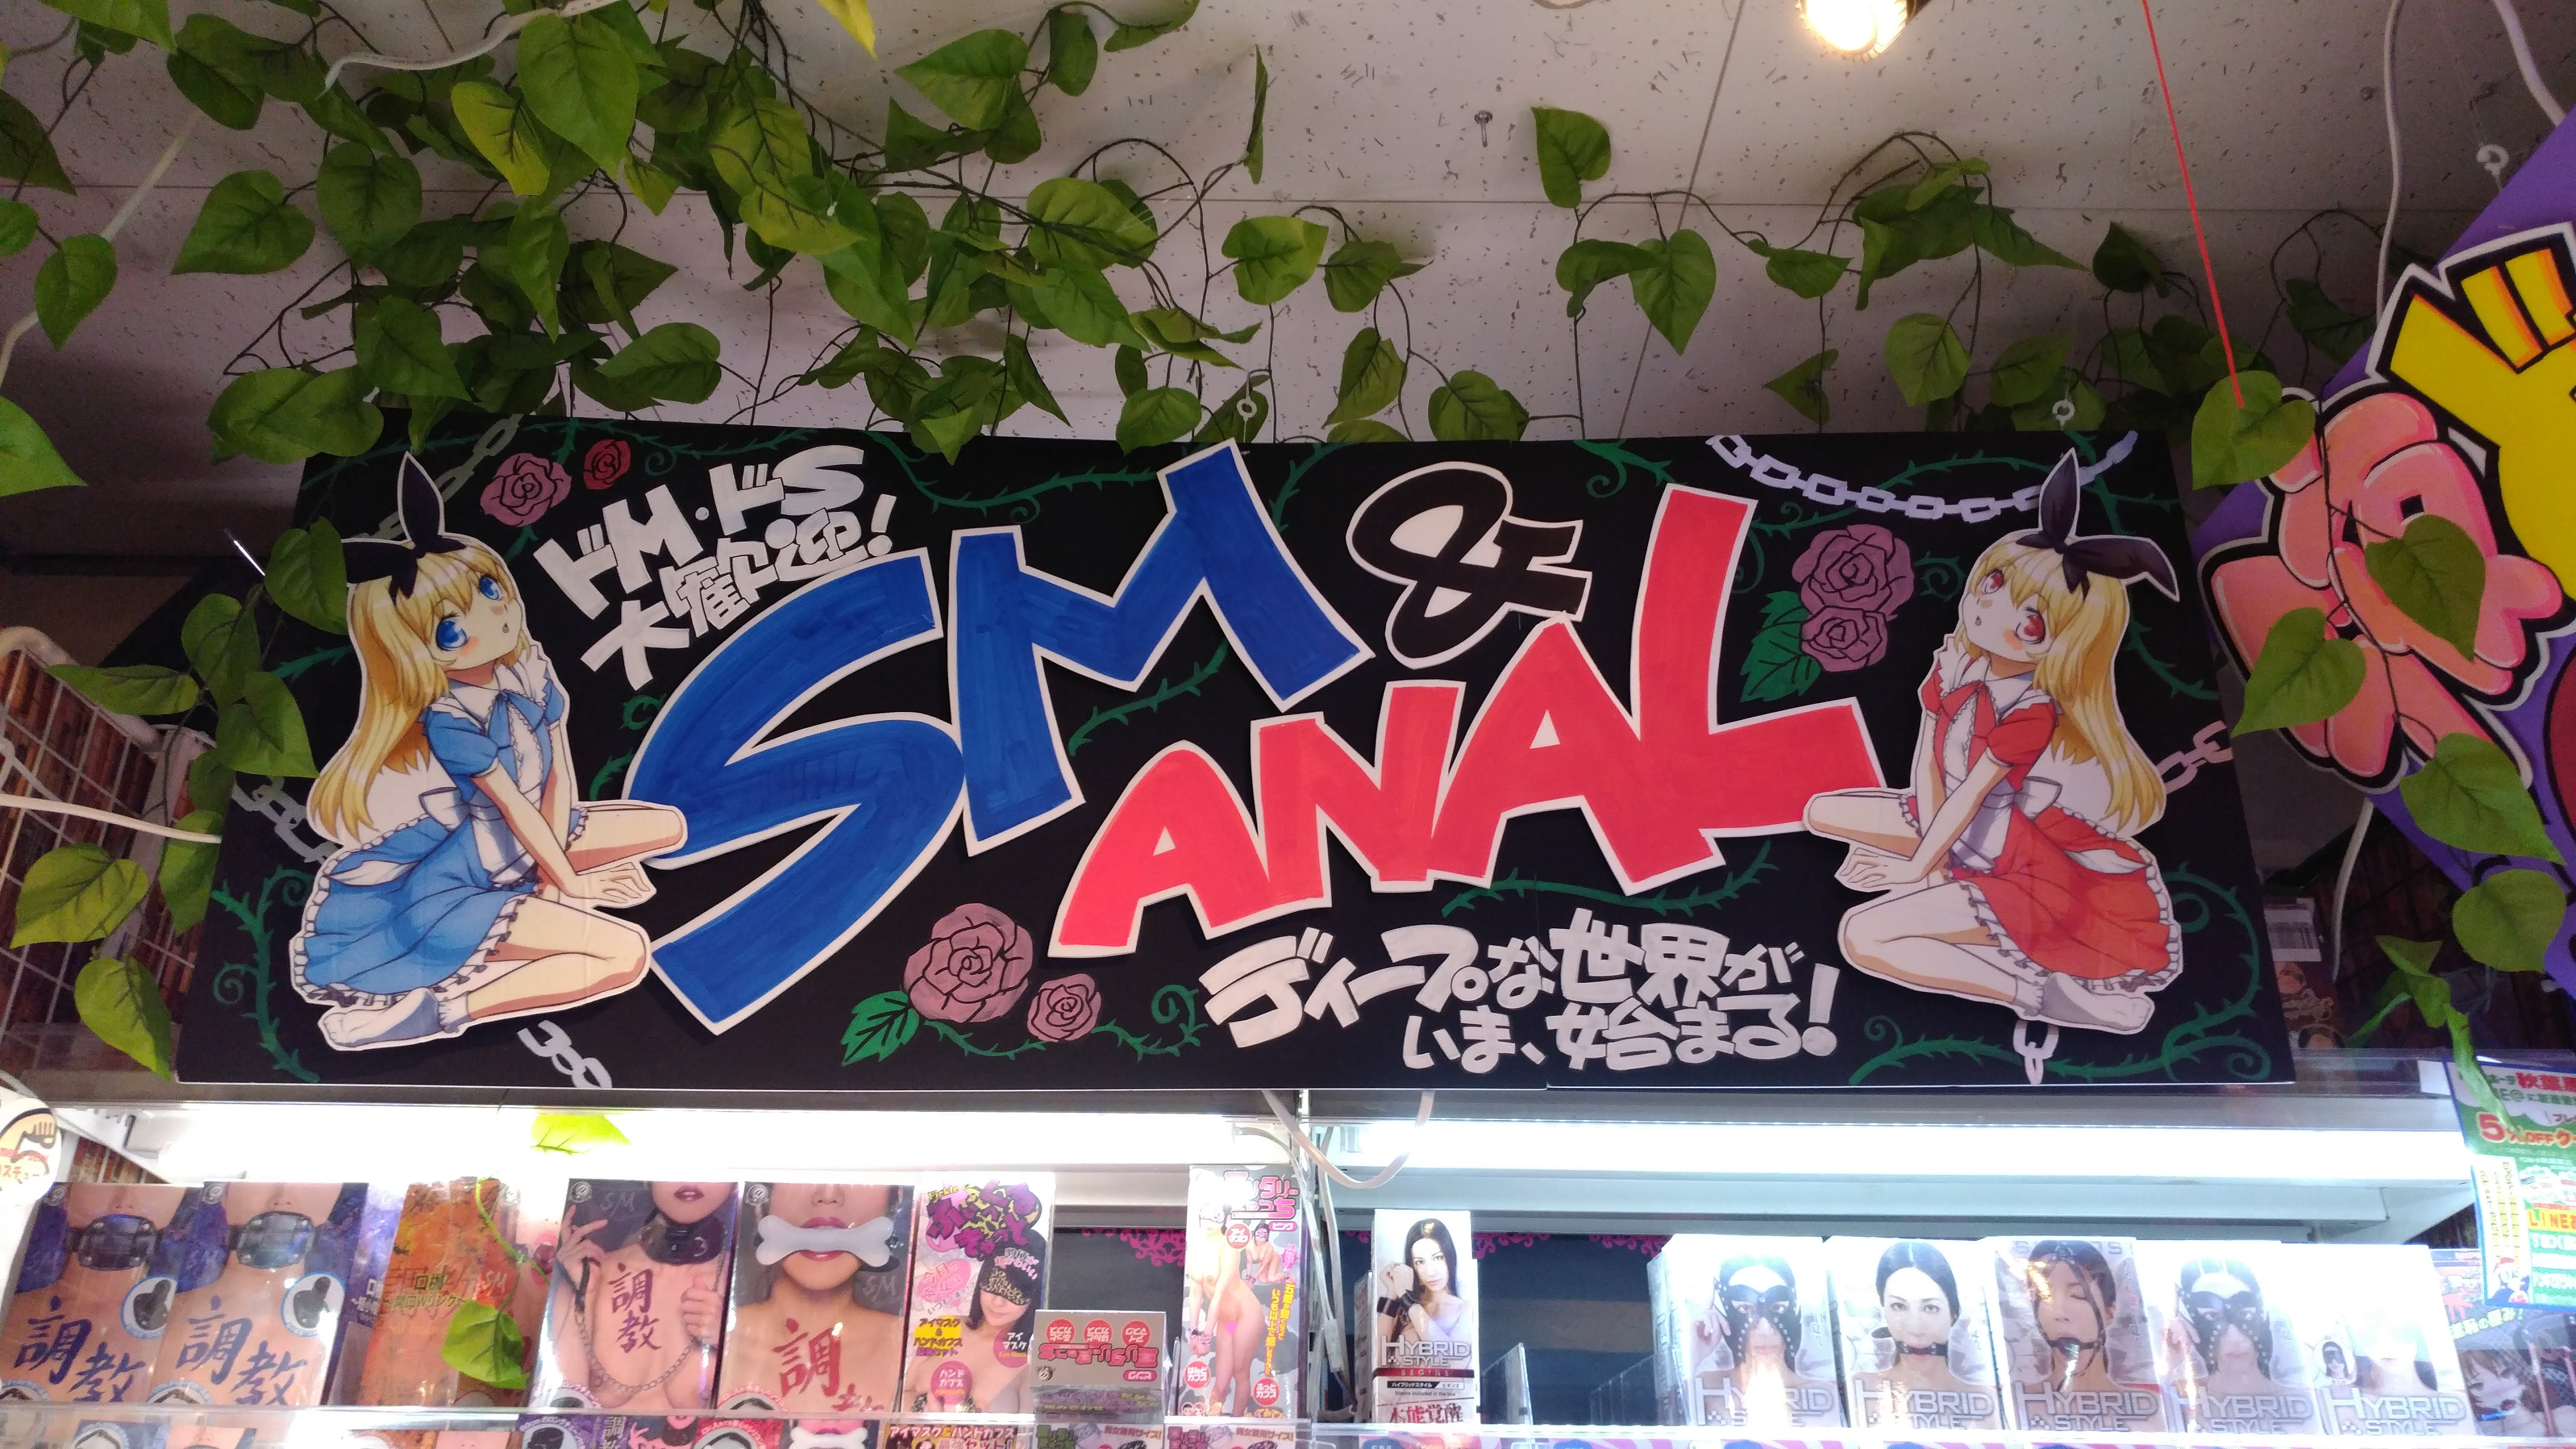 a hand-drawn sign with lolita style illustrations of women that says SM & Anal